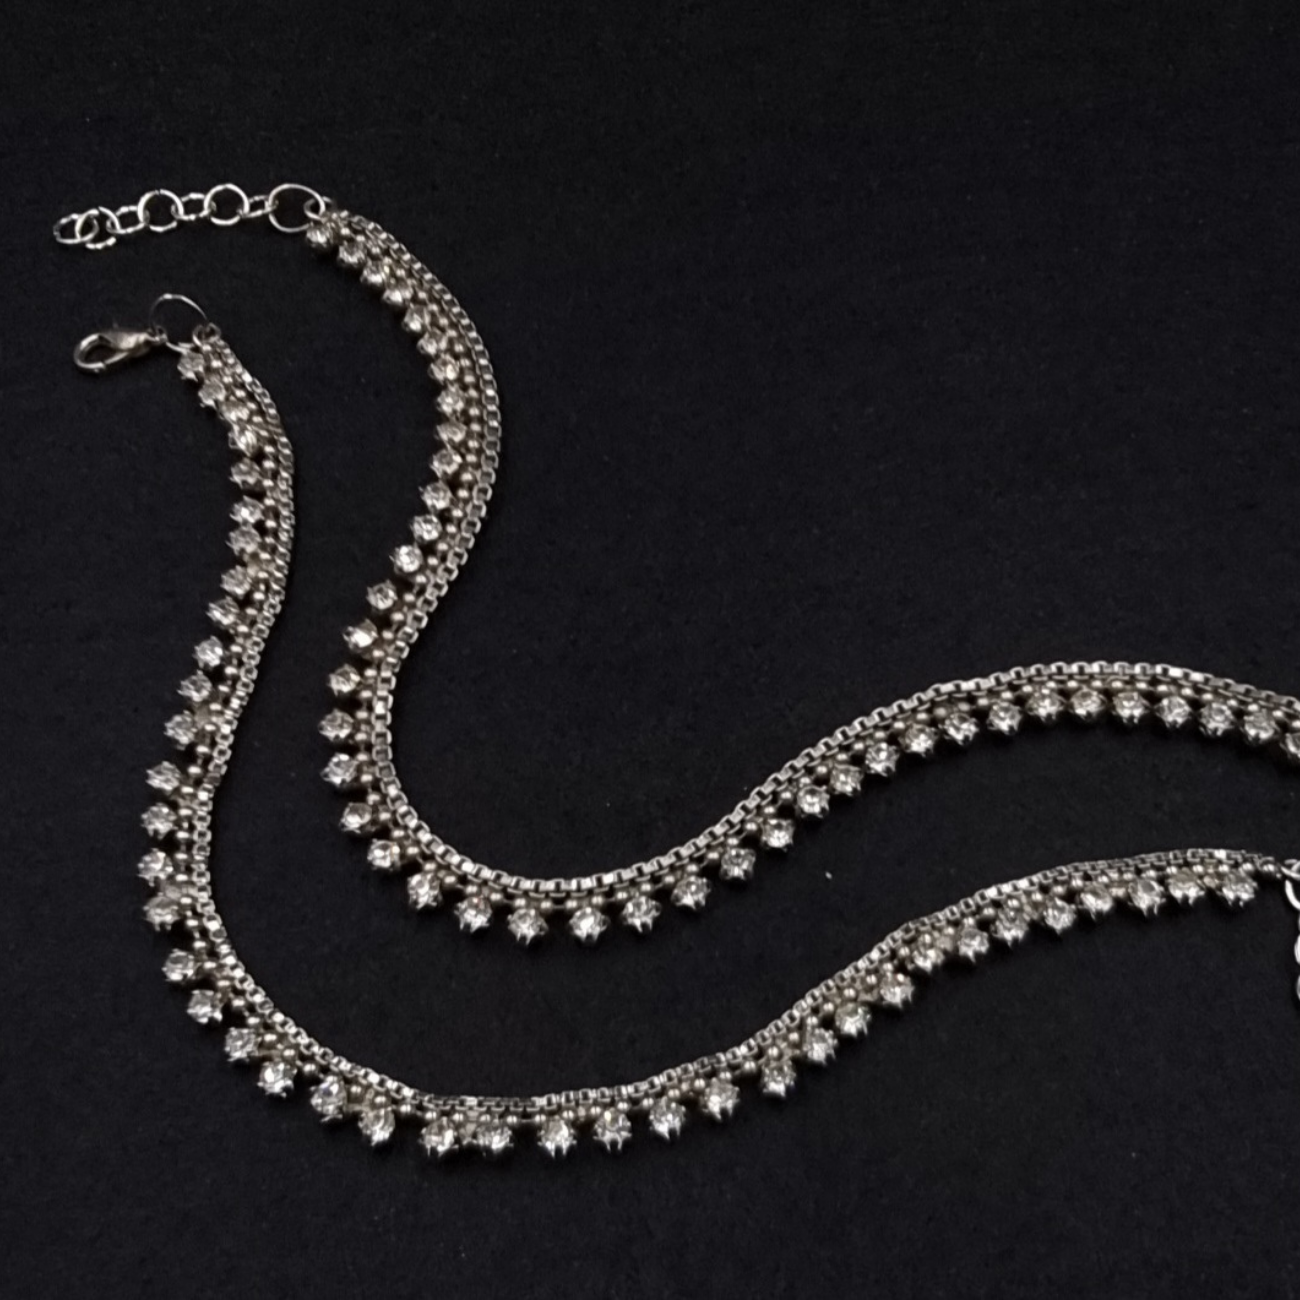 Oxidized silver anklet.